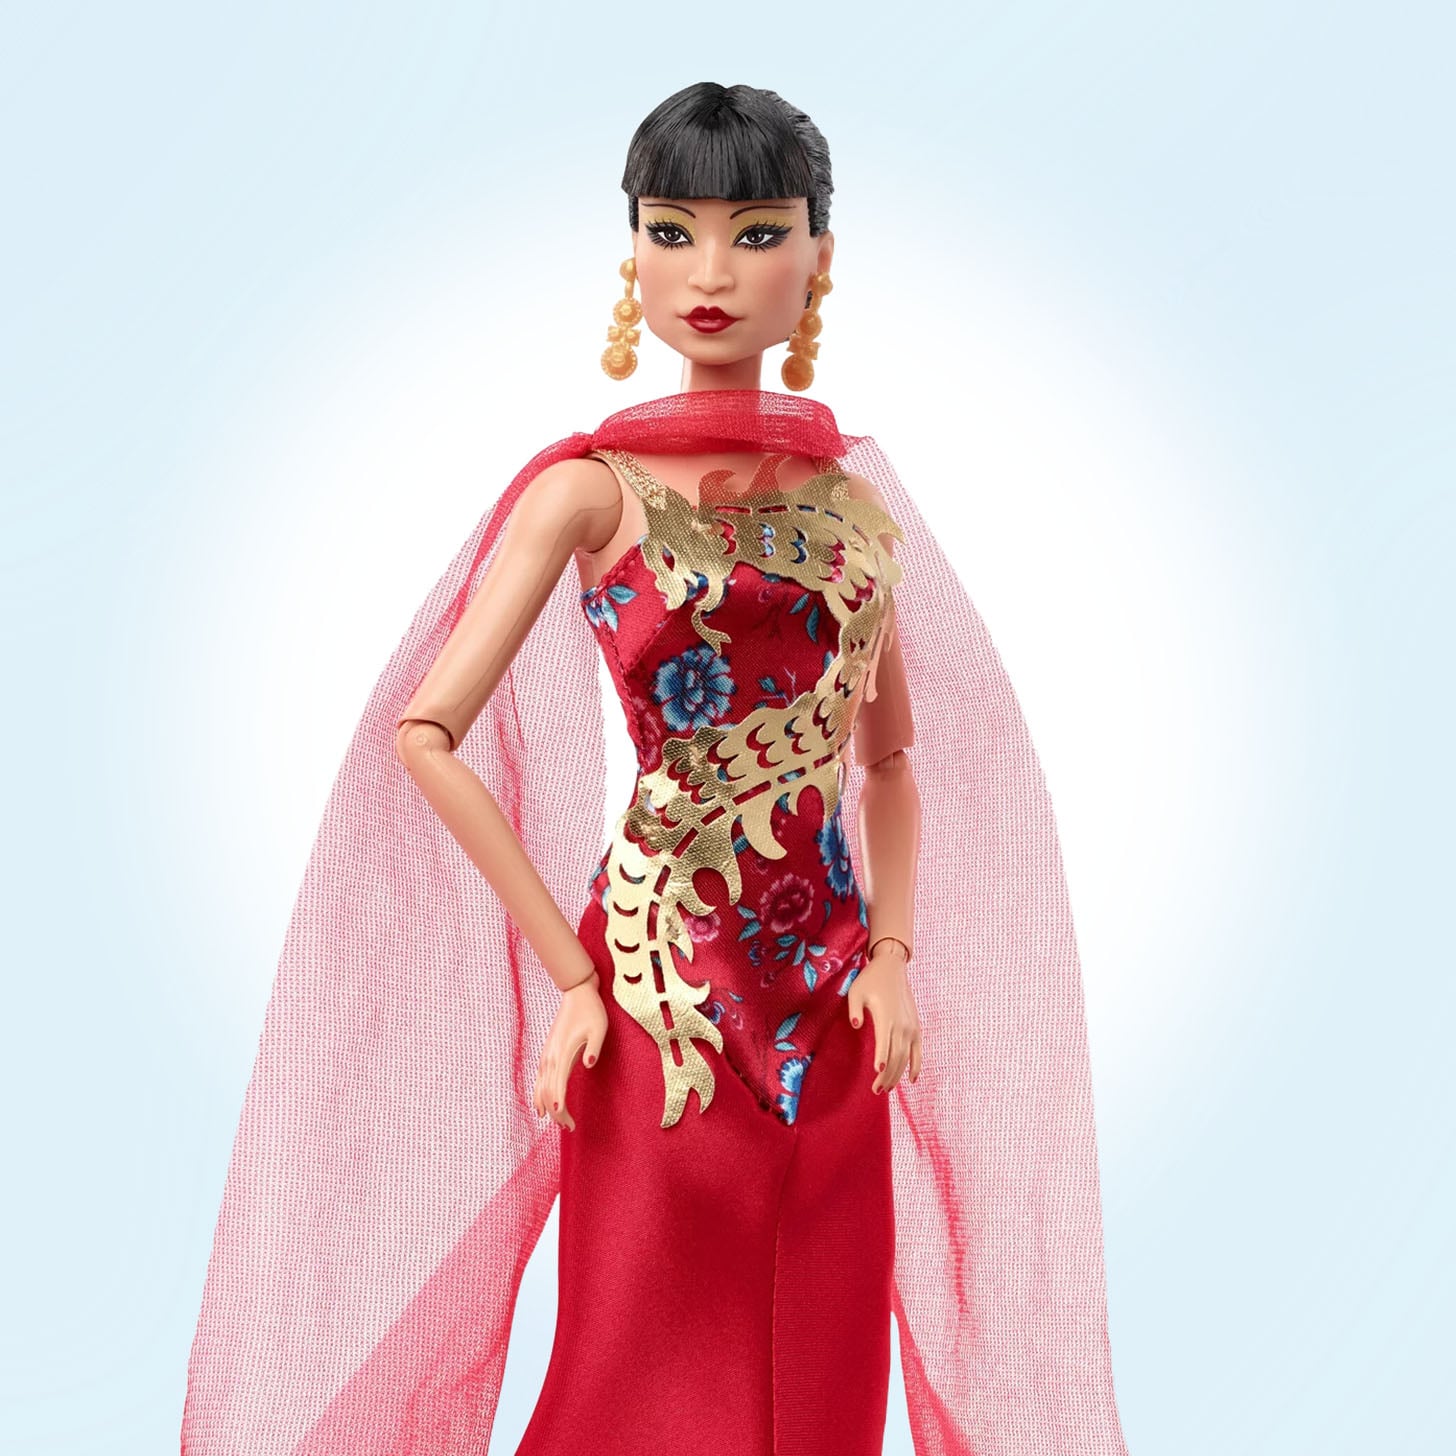 Barbie career dolls unveiled with director, movie star after